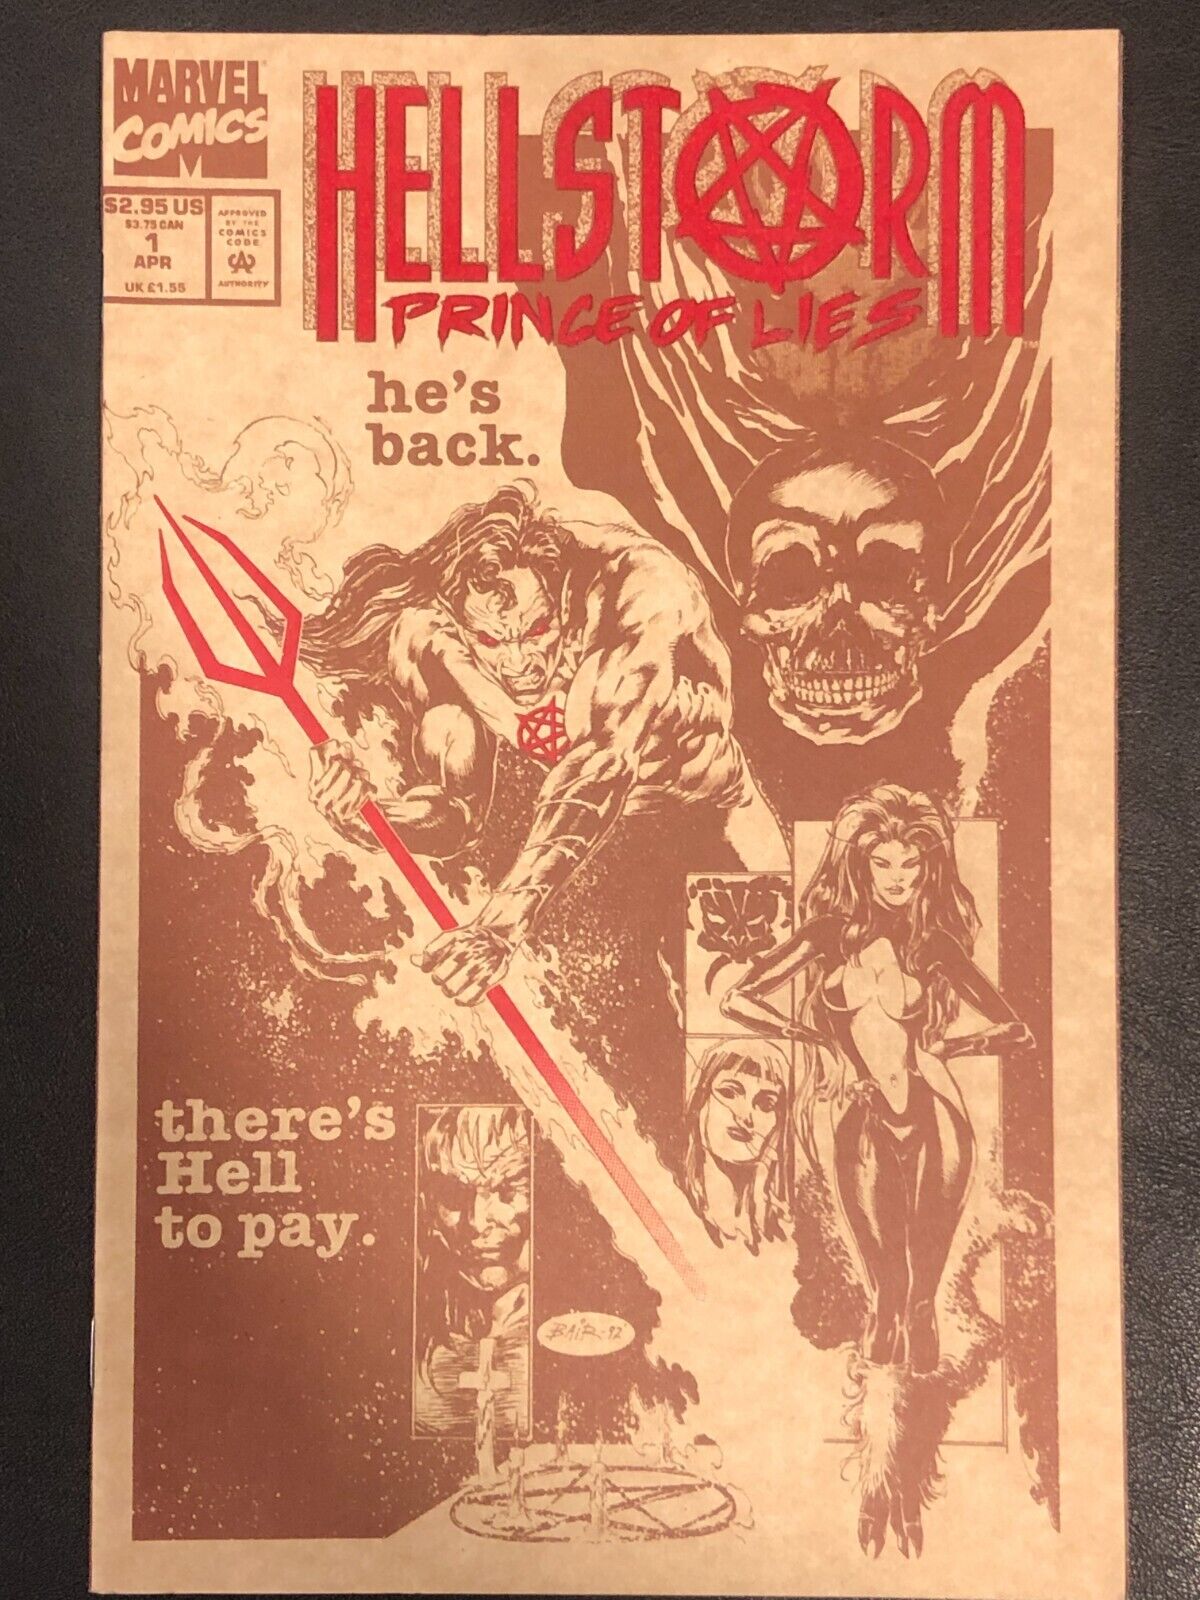 HellStorm Prince of Lies Issue #1 Marvel Comic Book 1993